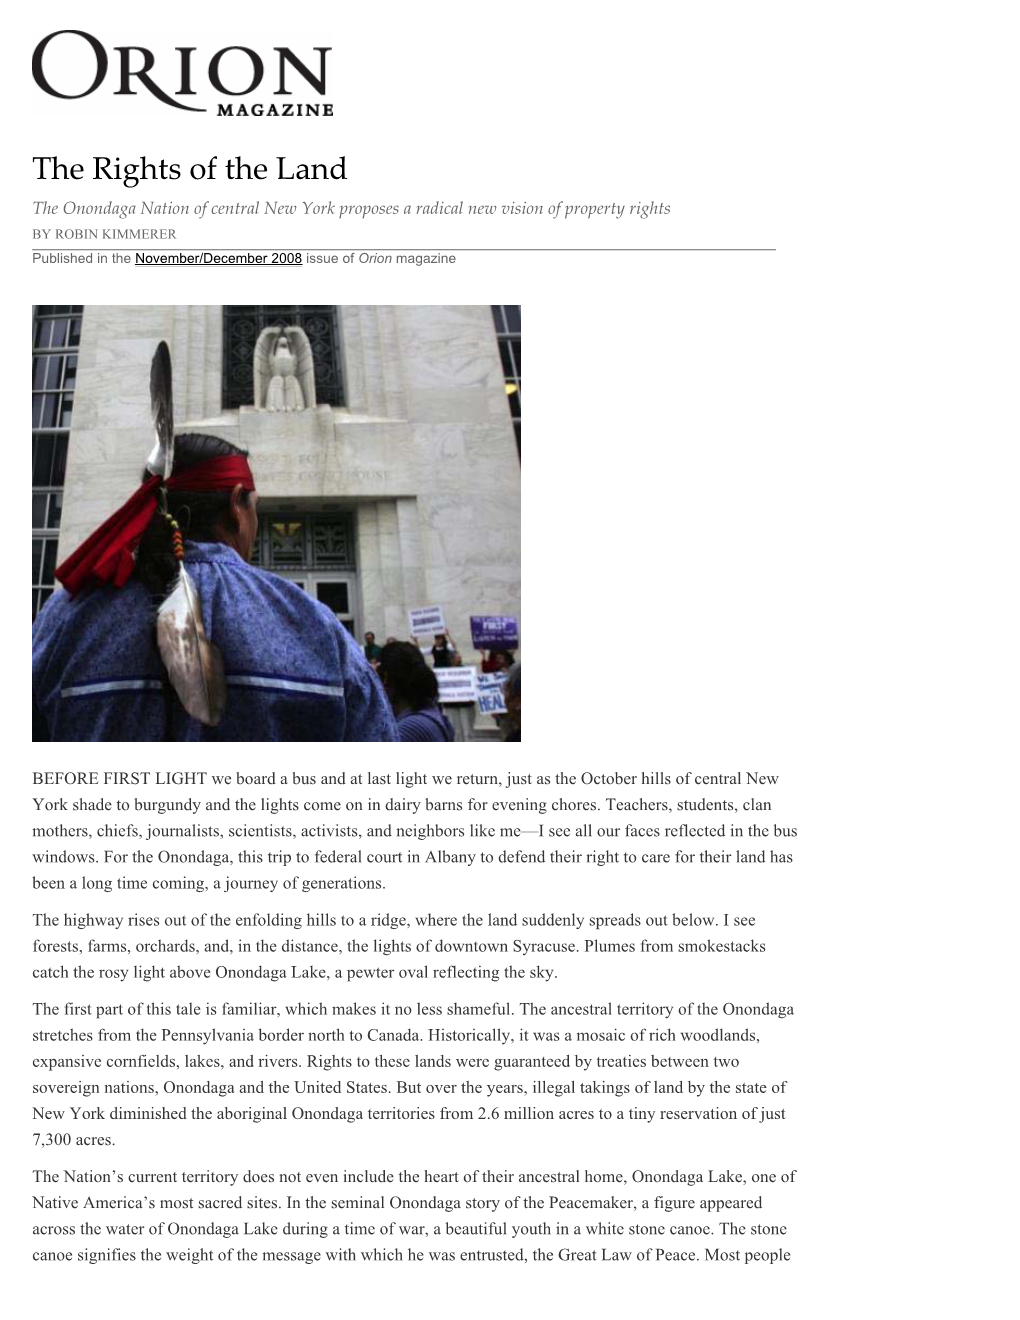 The Rights of the Land